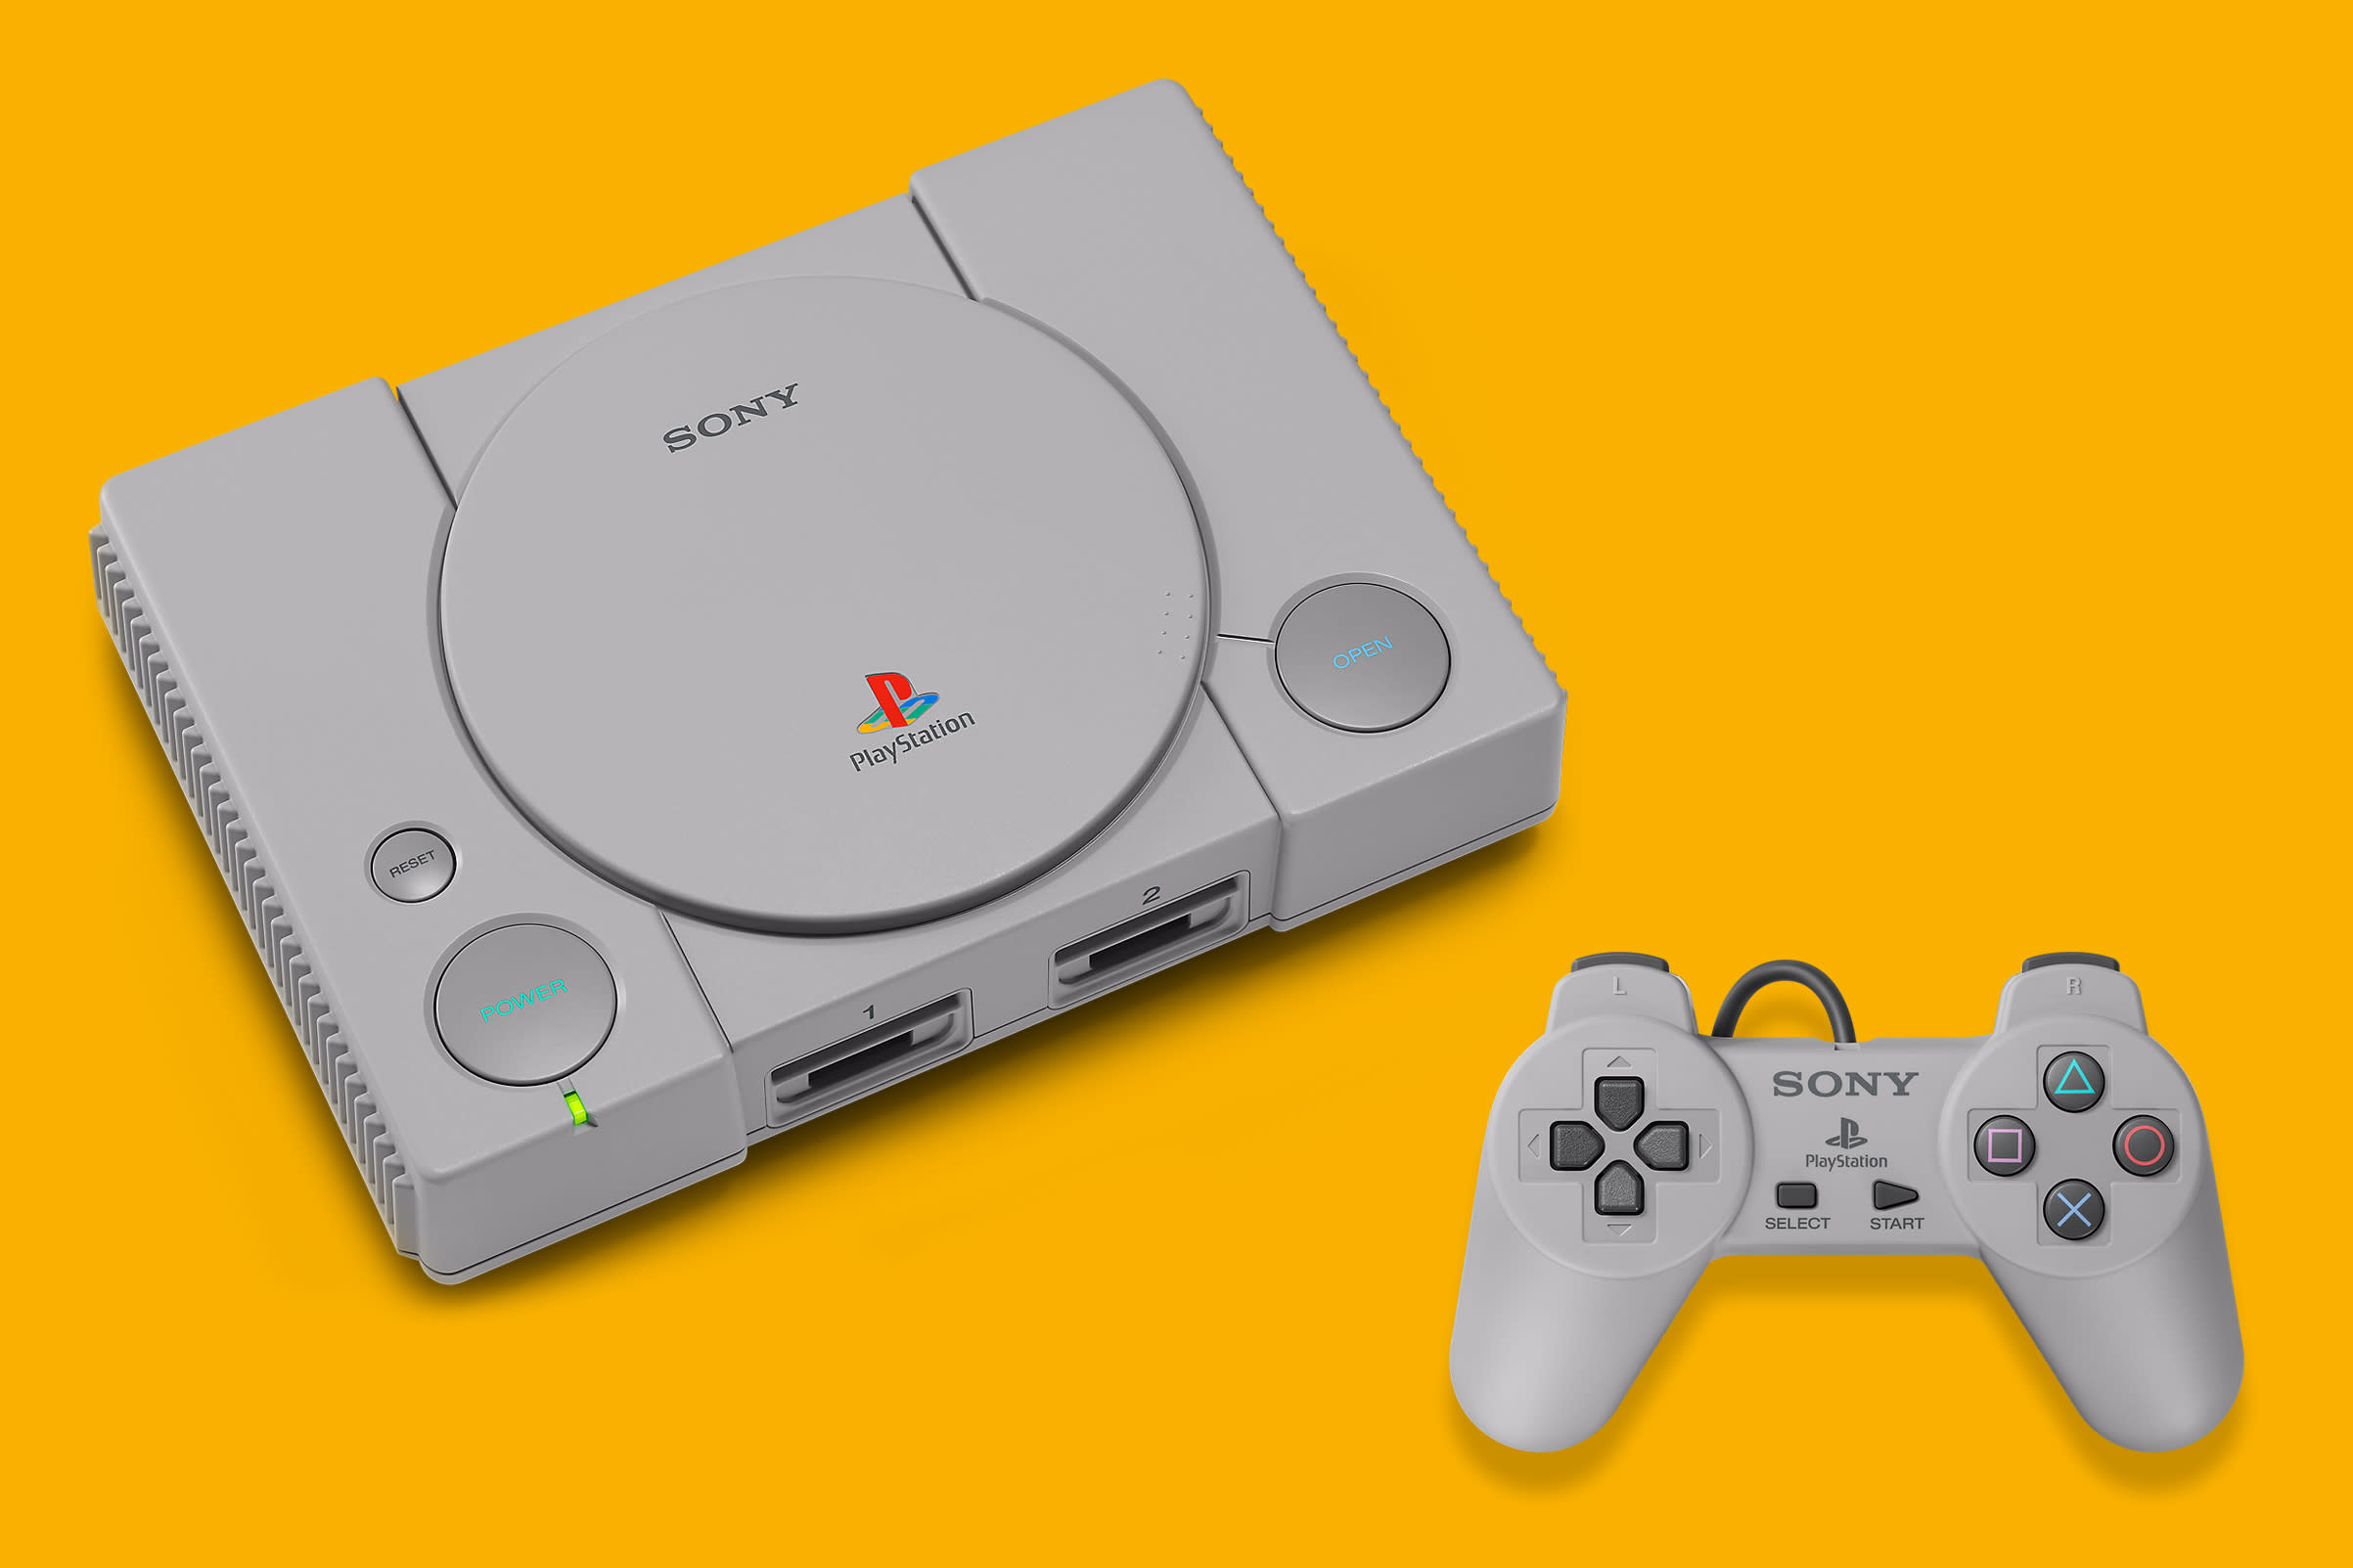 Ps4 classic. Sony PLAYSTATION 1 Classic. Приставка Sony ps1. Sony ps1 Classic. Сони 1 приставка.